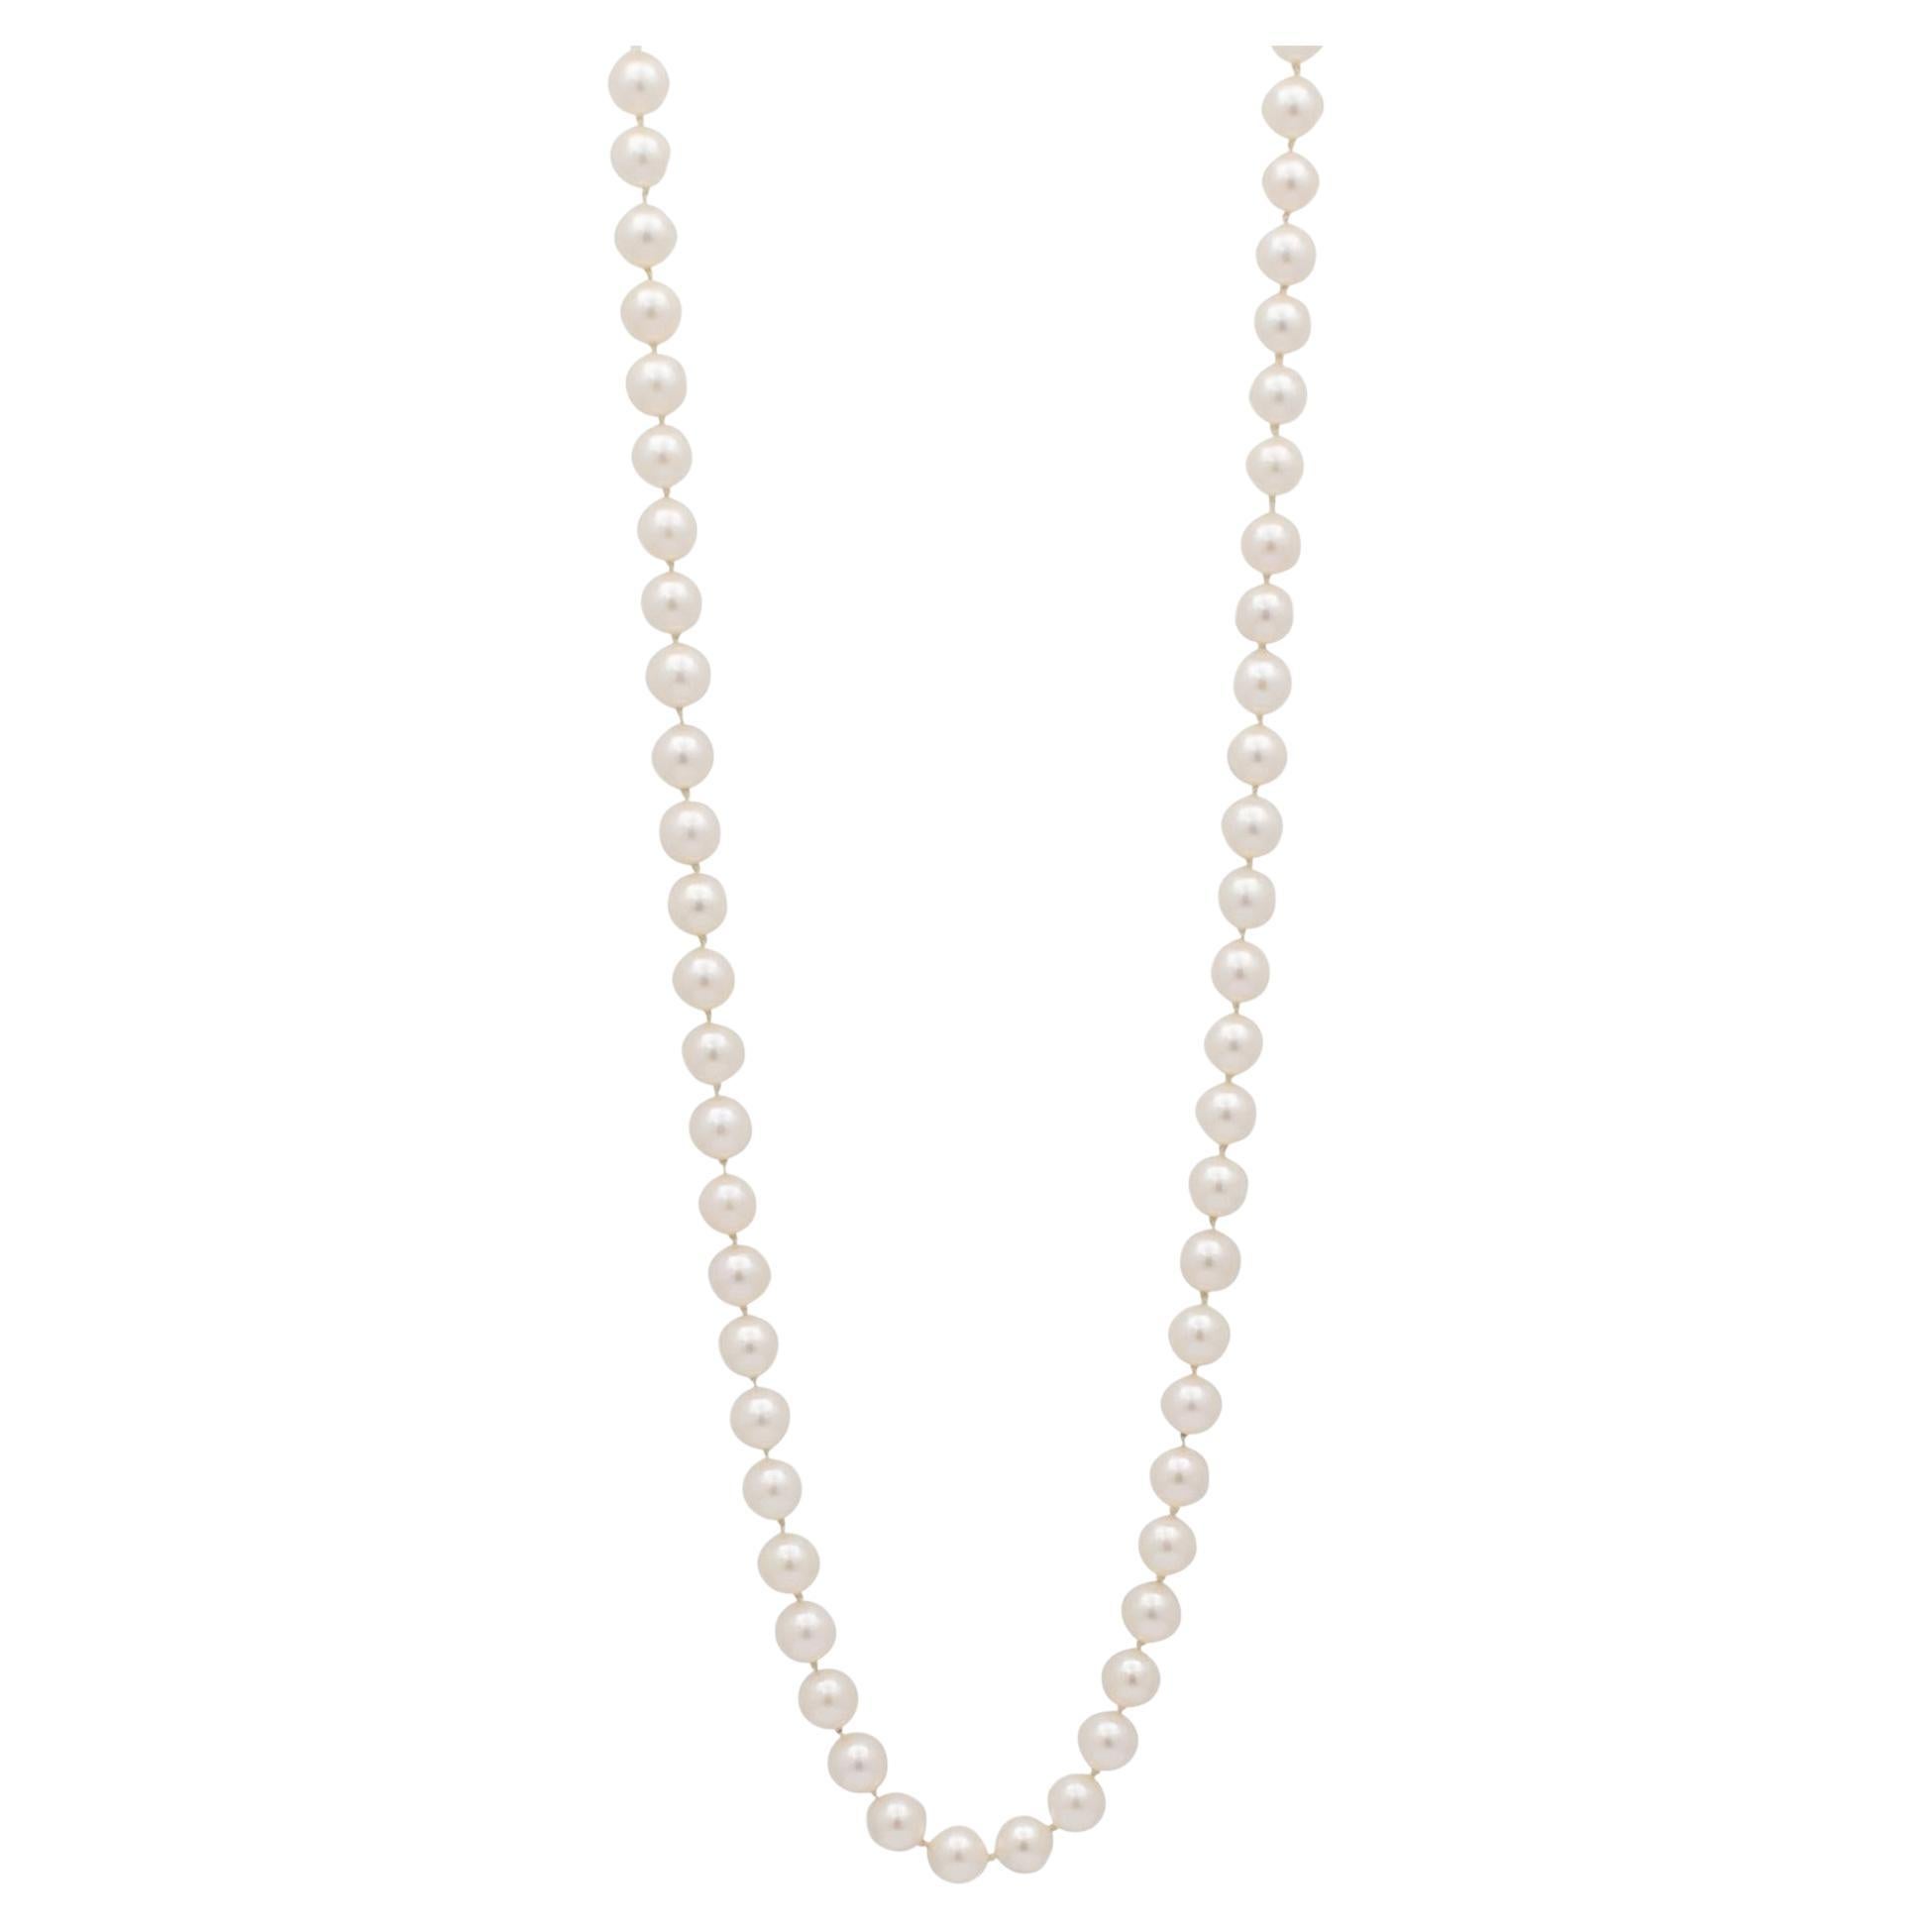 Mikimoto Akoya Cultured Pearl Strand Bead Chain Necklace - 18K Yellow Gold Clasp For Sale